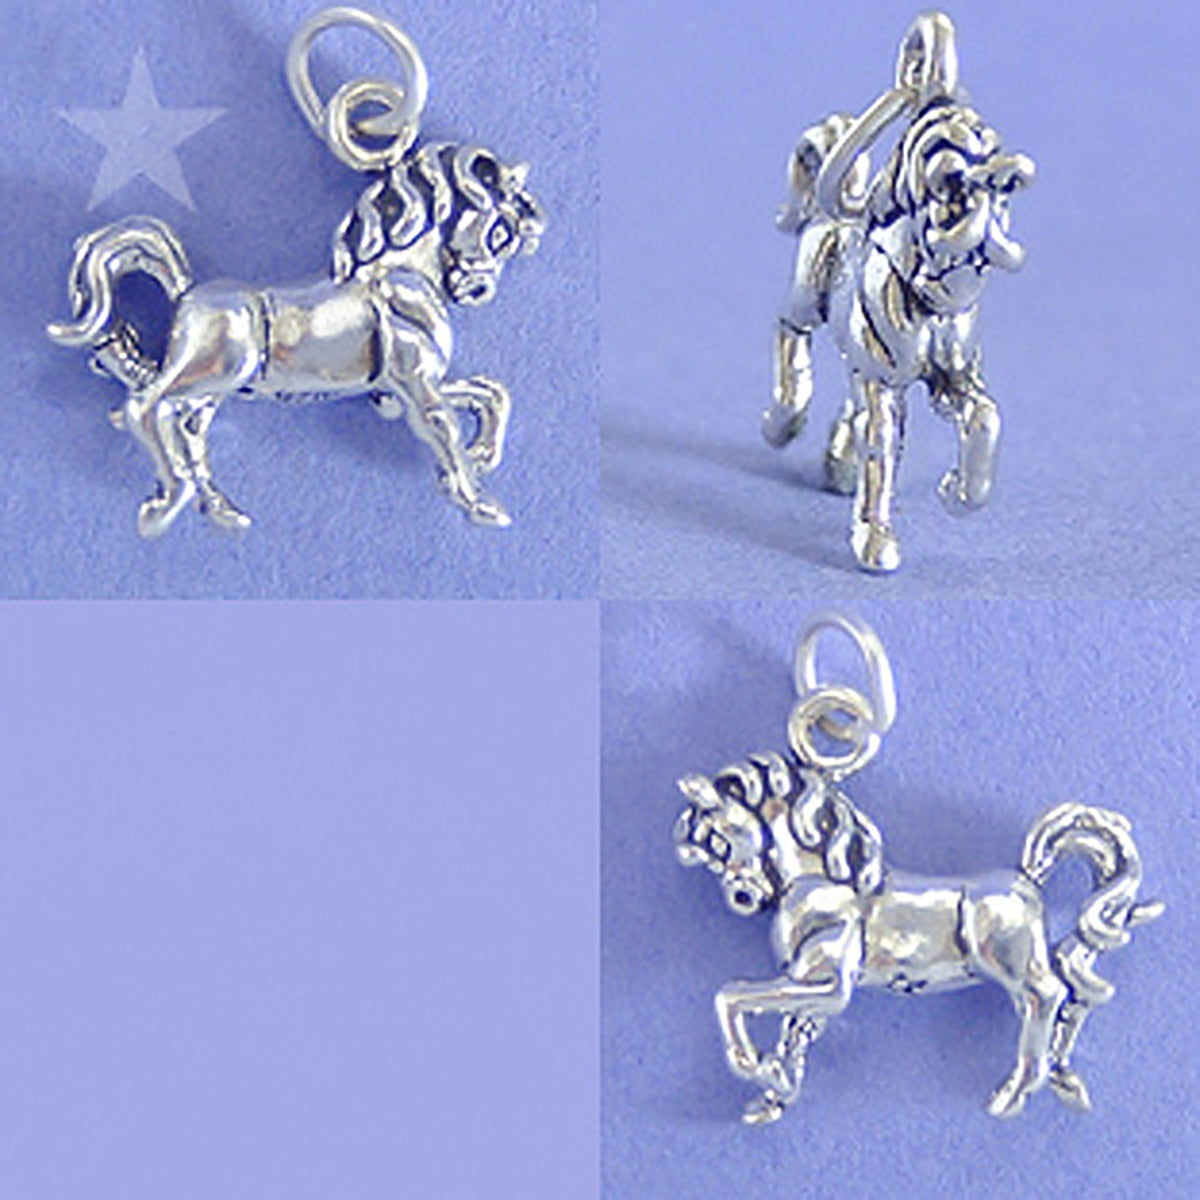 Sterling silver Spanish Andalusian horse charm